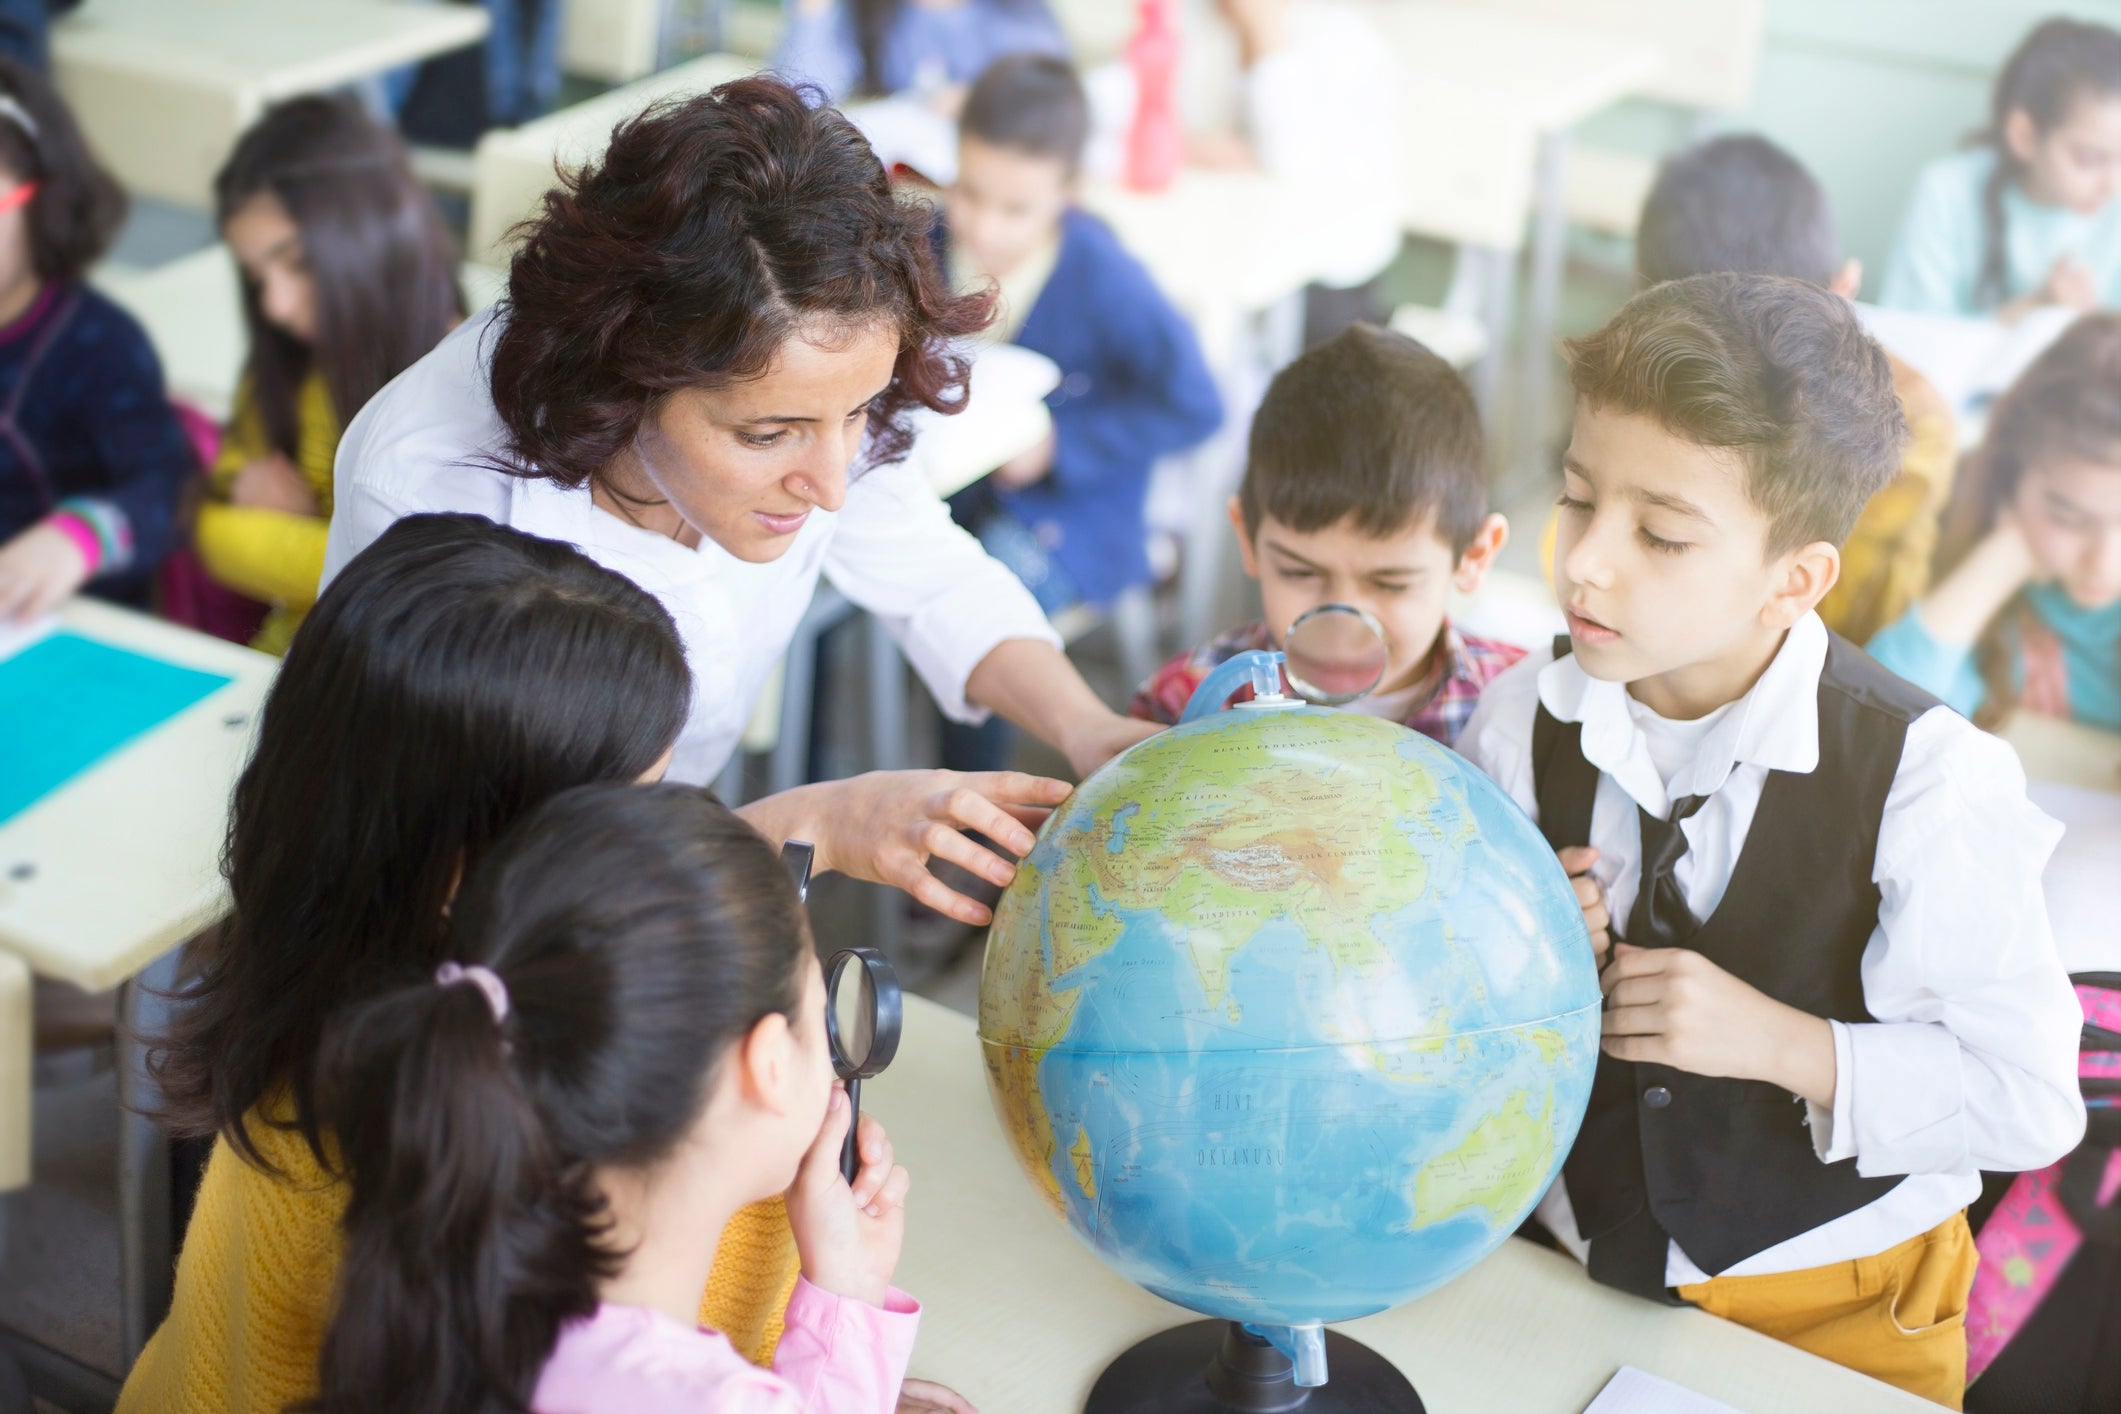 A female teacher and students looking at a globe with a magnifying glass in a classroom